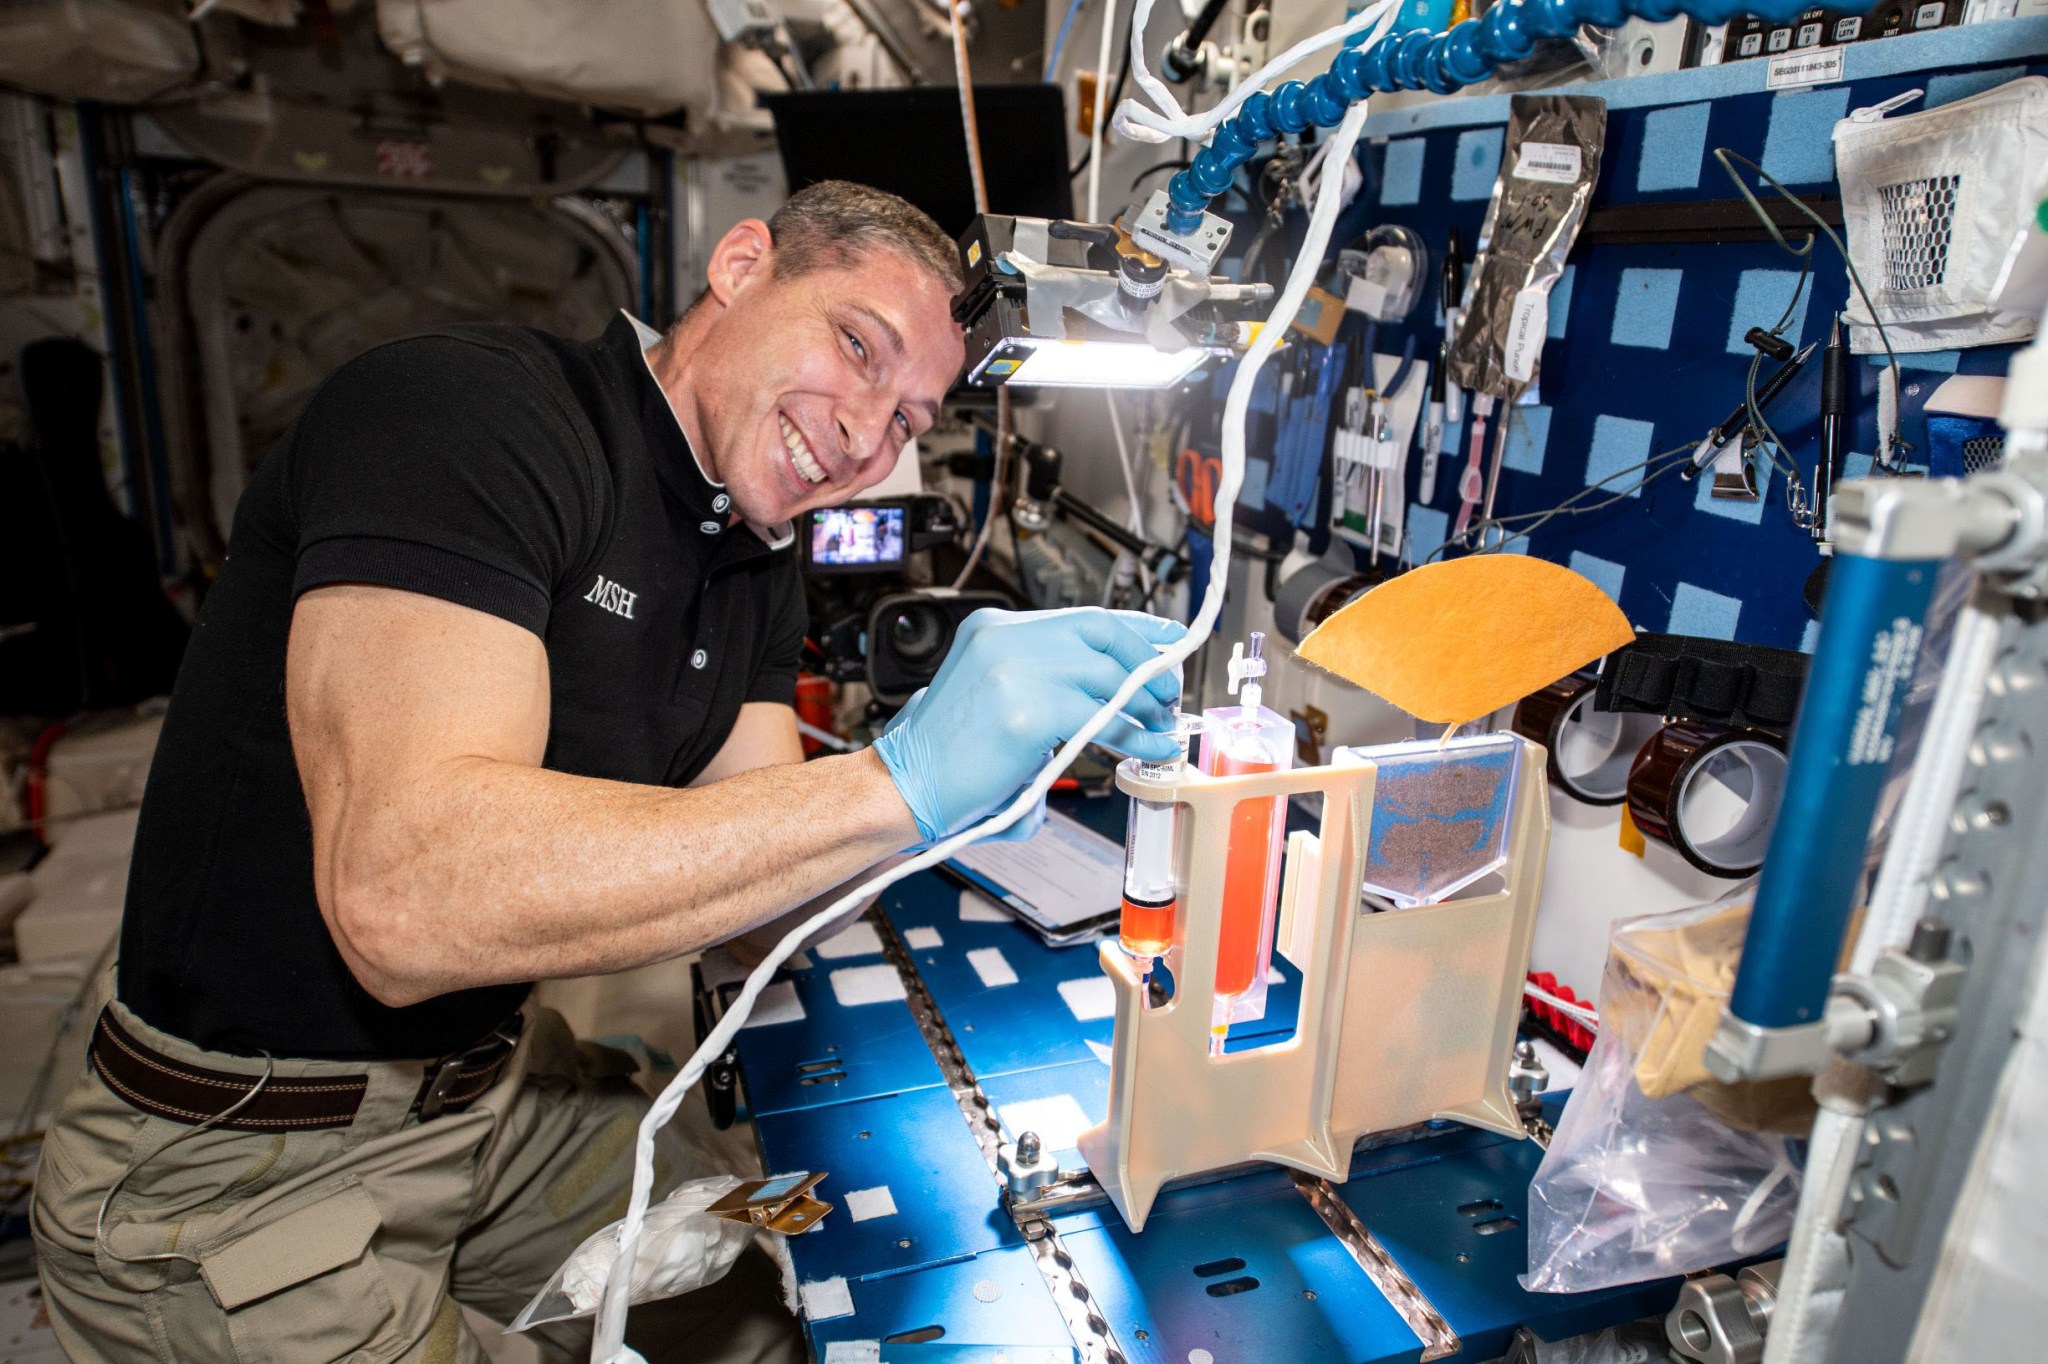 Astronaut smiles at the camera while working on experiment on the space station